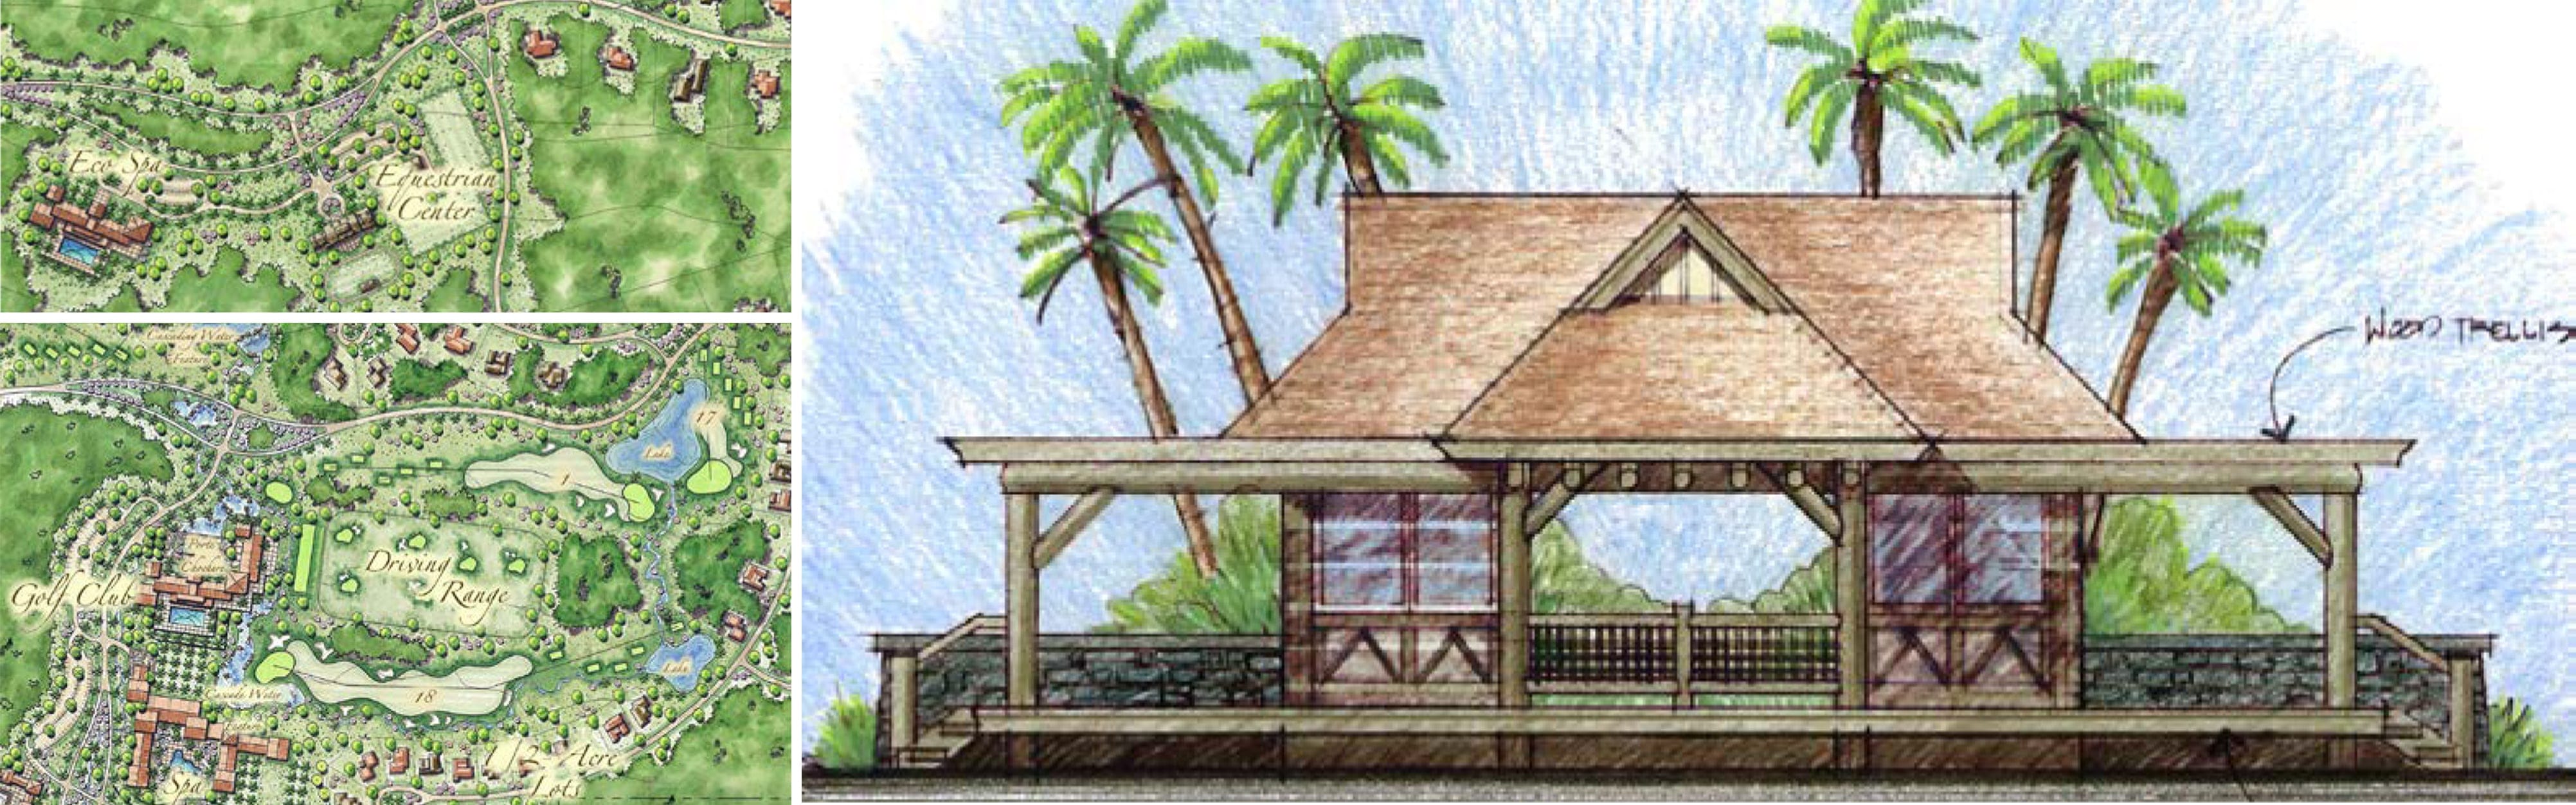 Master Planning Architecture Design In Captain Hook, Hawaii